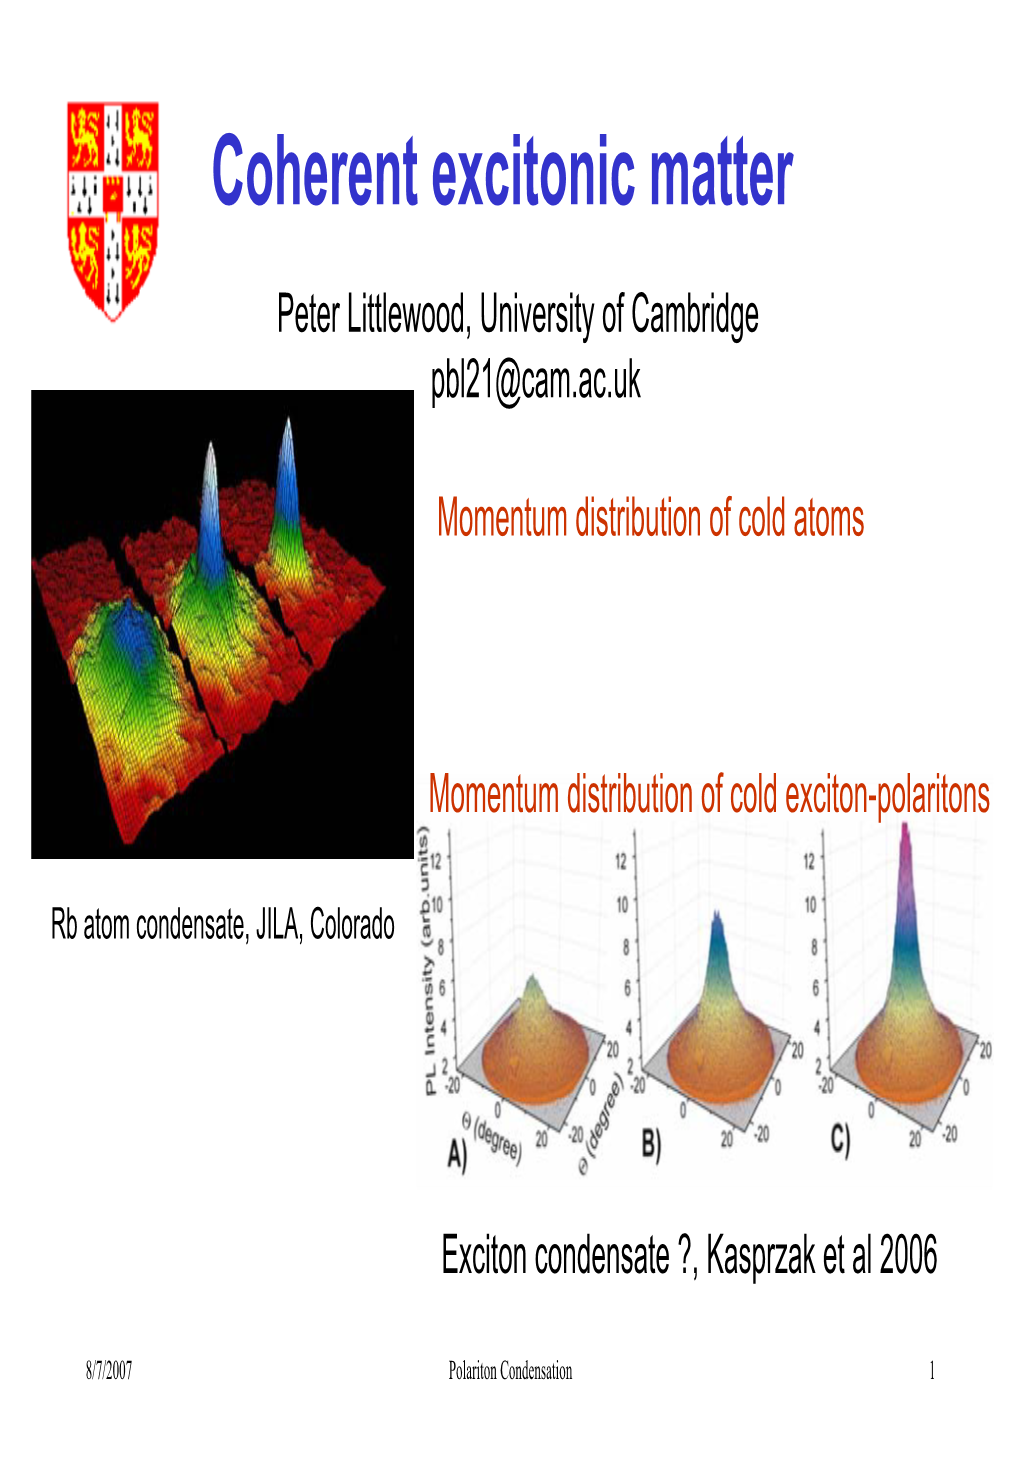 Bose Condensation of Excitons, Optical Coherence and Lasers